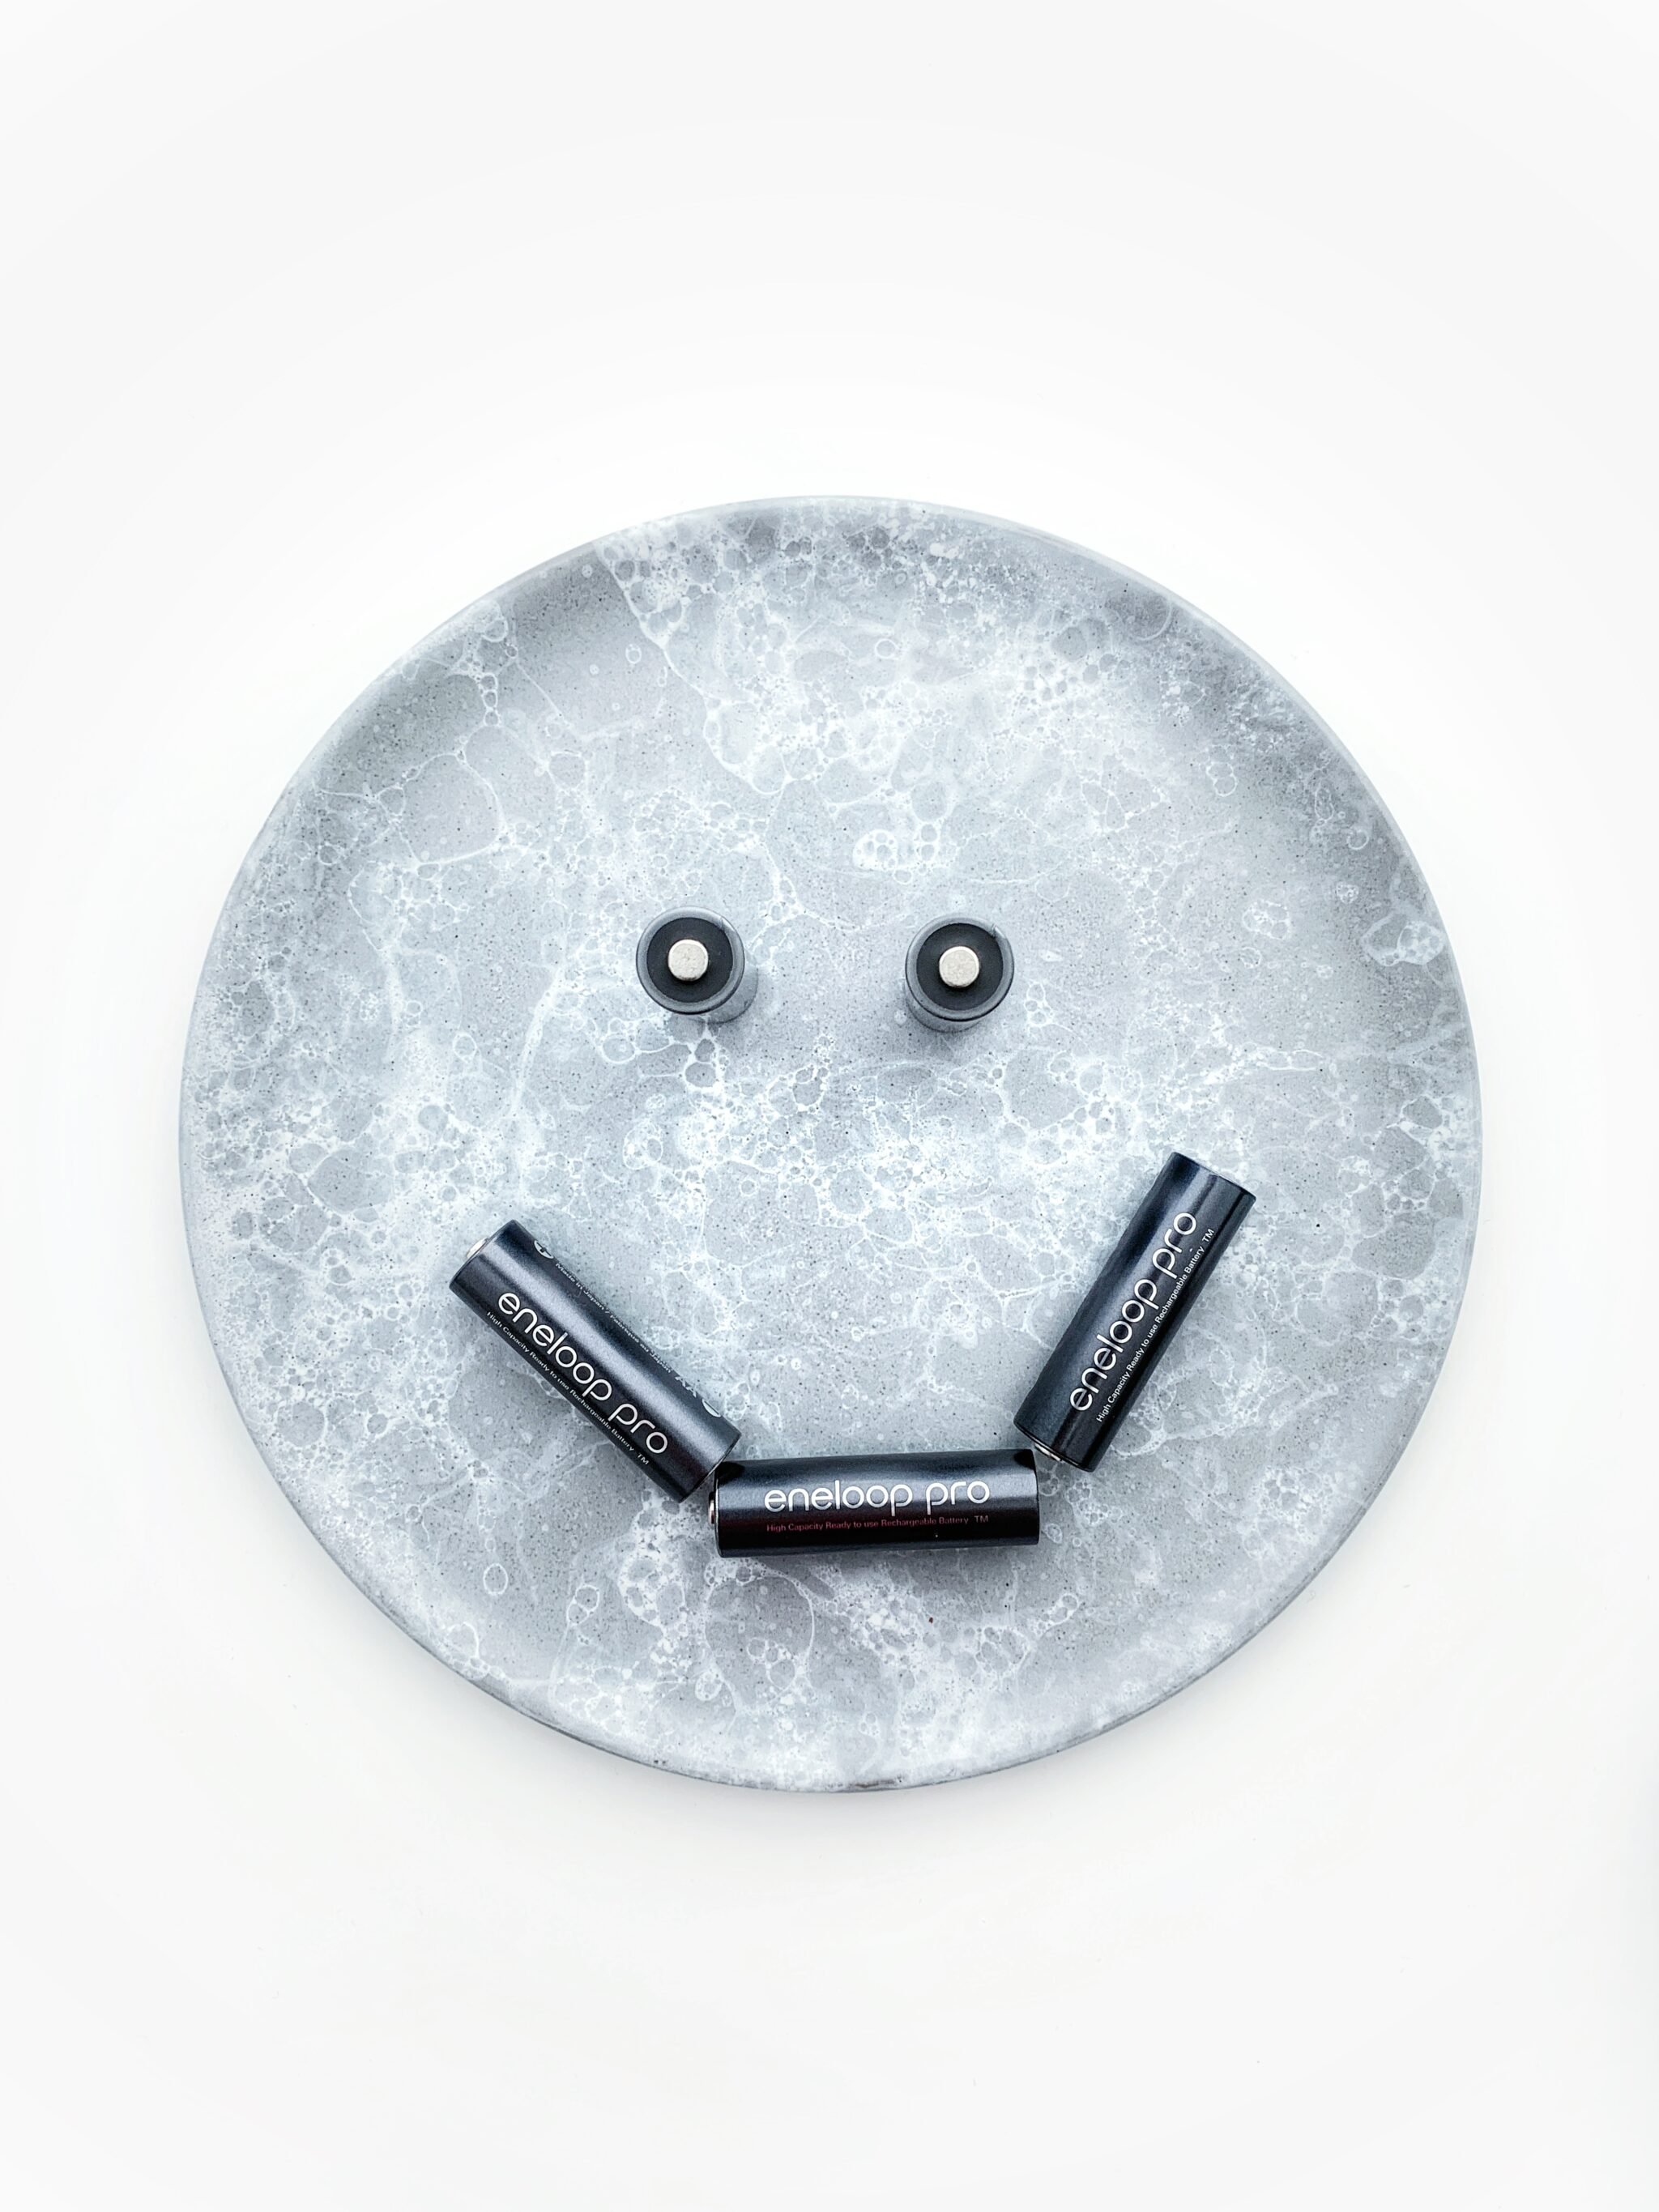 An overhead view of eco-friendly photography batteries that are positioned to look like a smiling face.